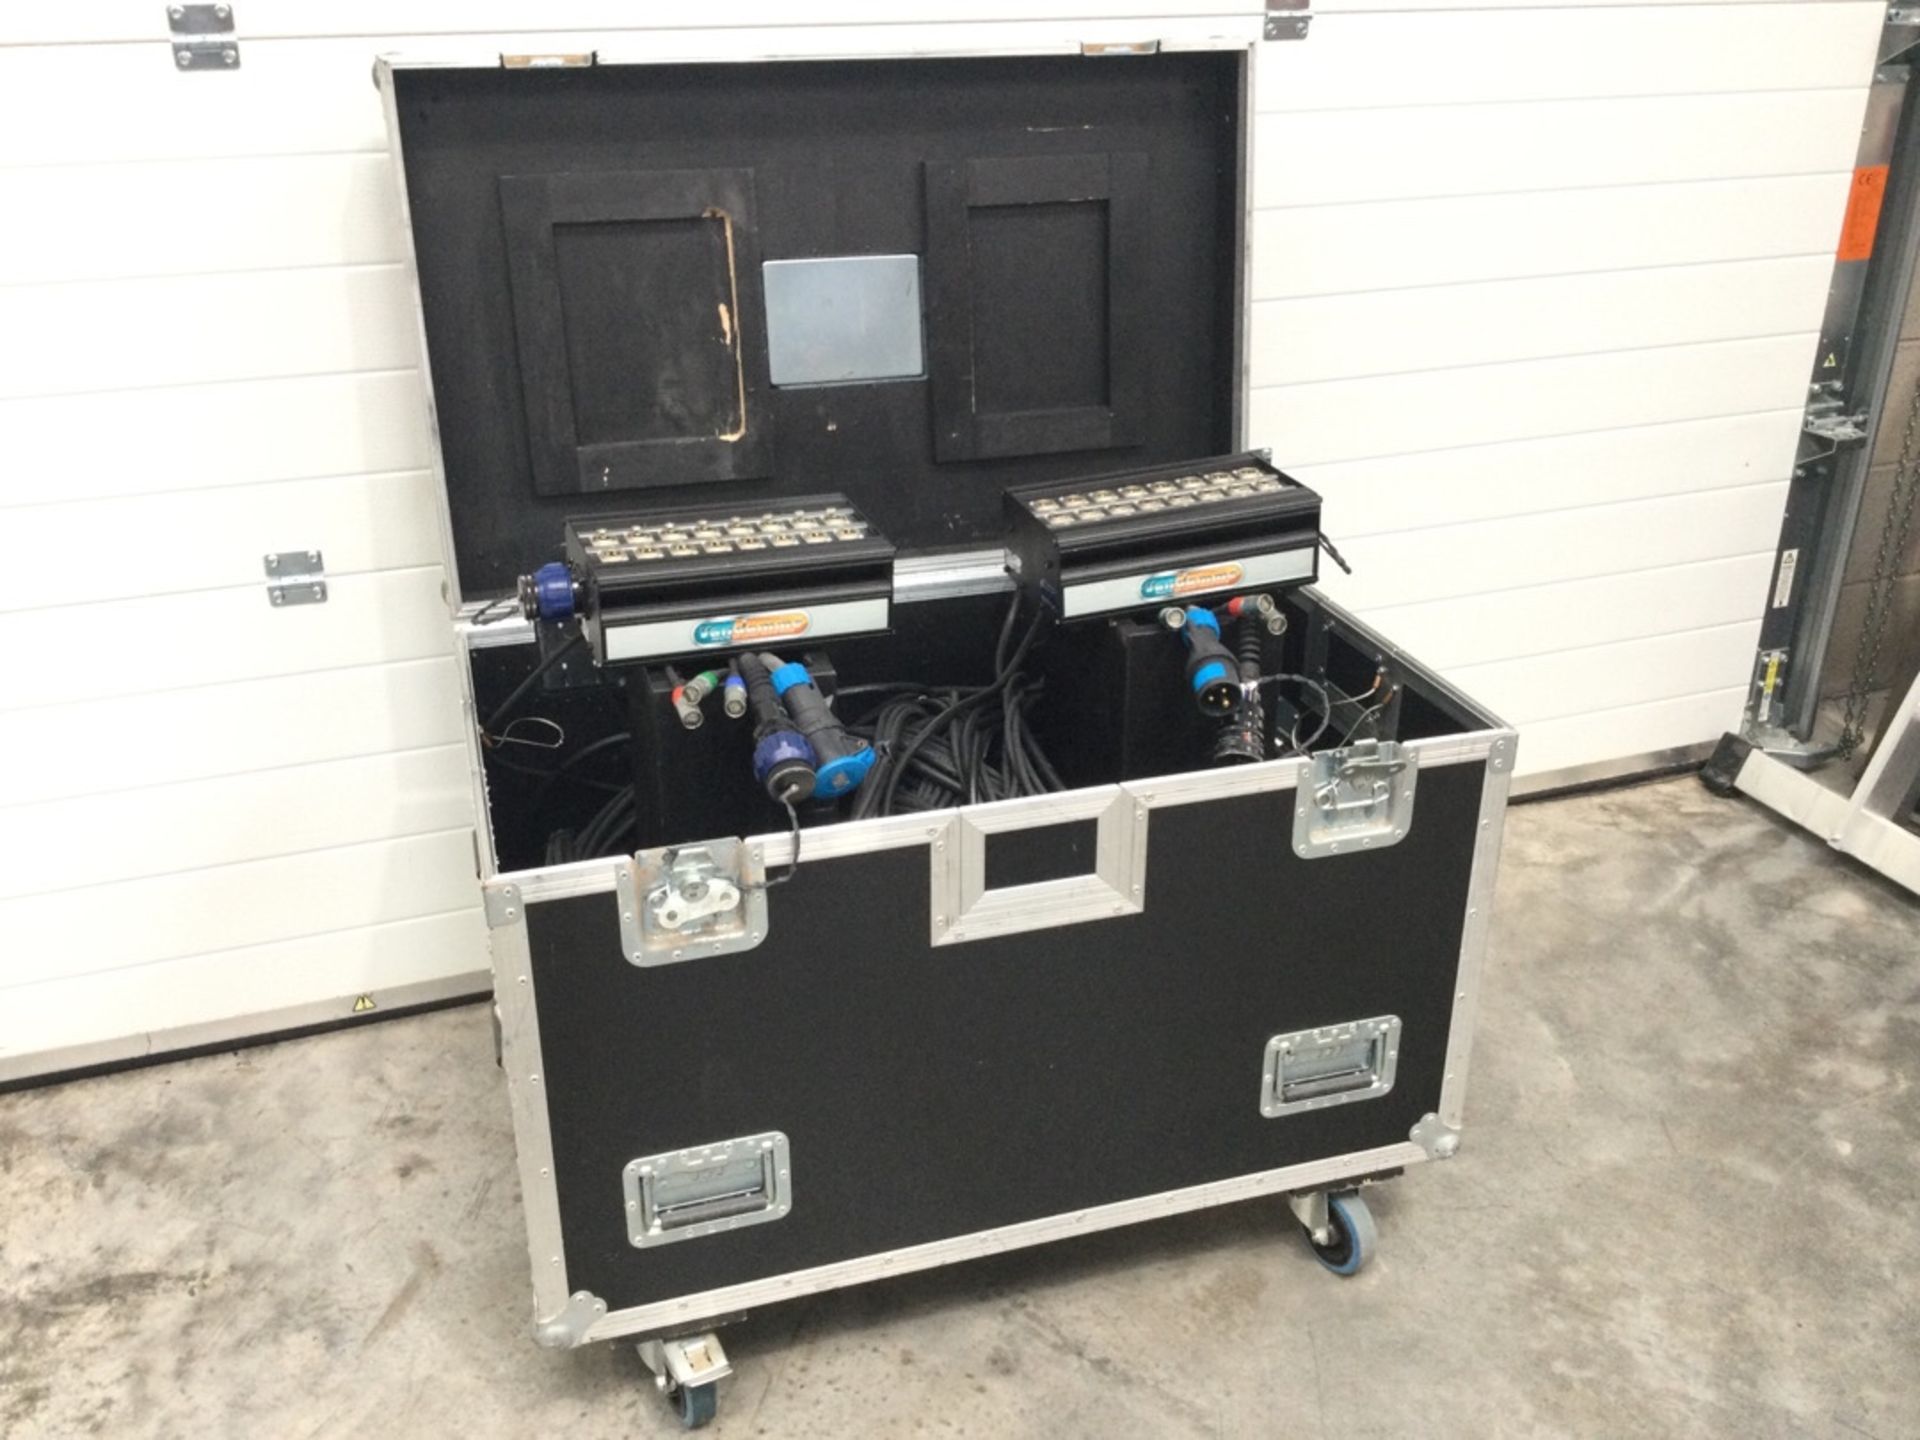 100m digital and analogue multicore and Flightcase. Compromising of 3 Ethercon, 8 bi directional XLR